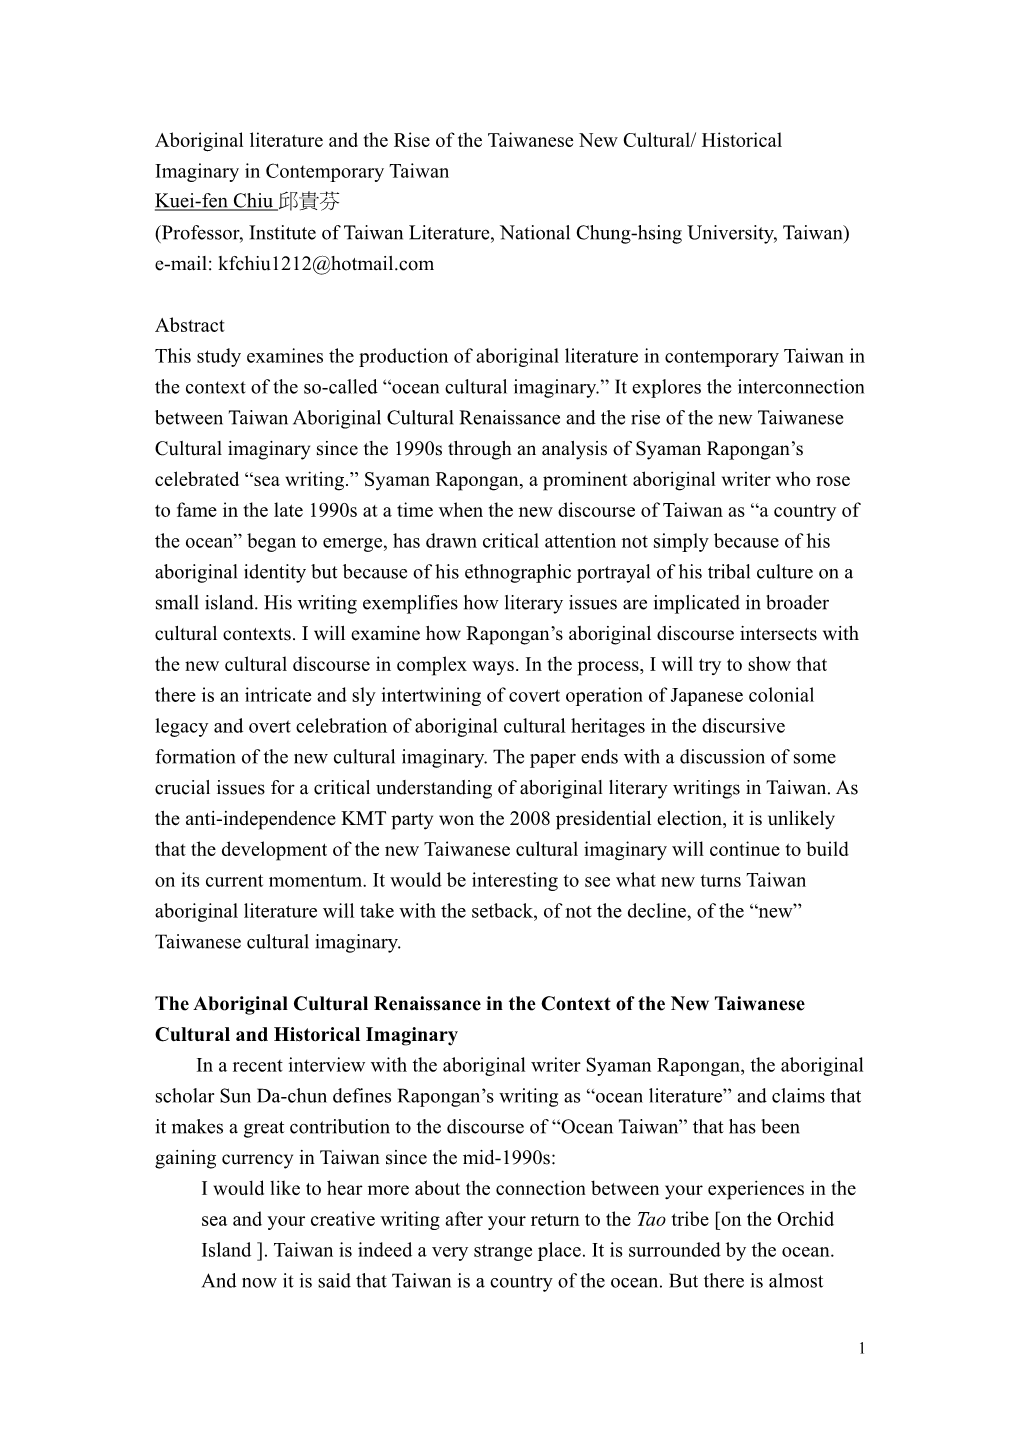 Aboriginal Literature and the Rise of the Taiwanese New Cultural Historical Imaginary in Contemporary Taiwan